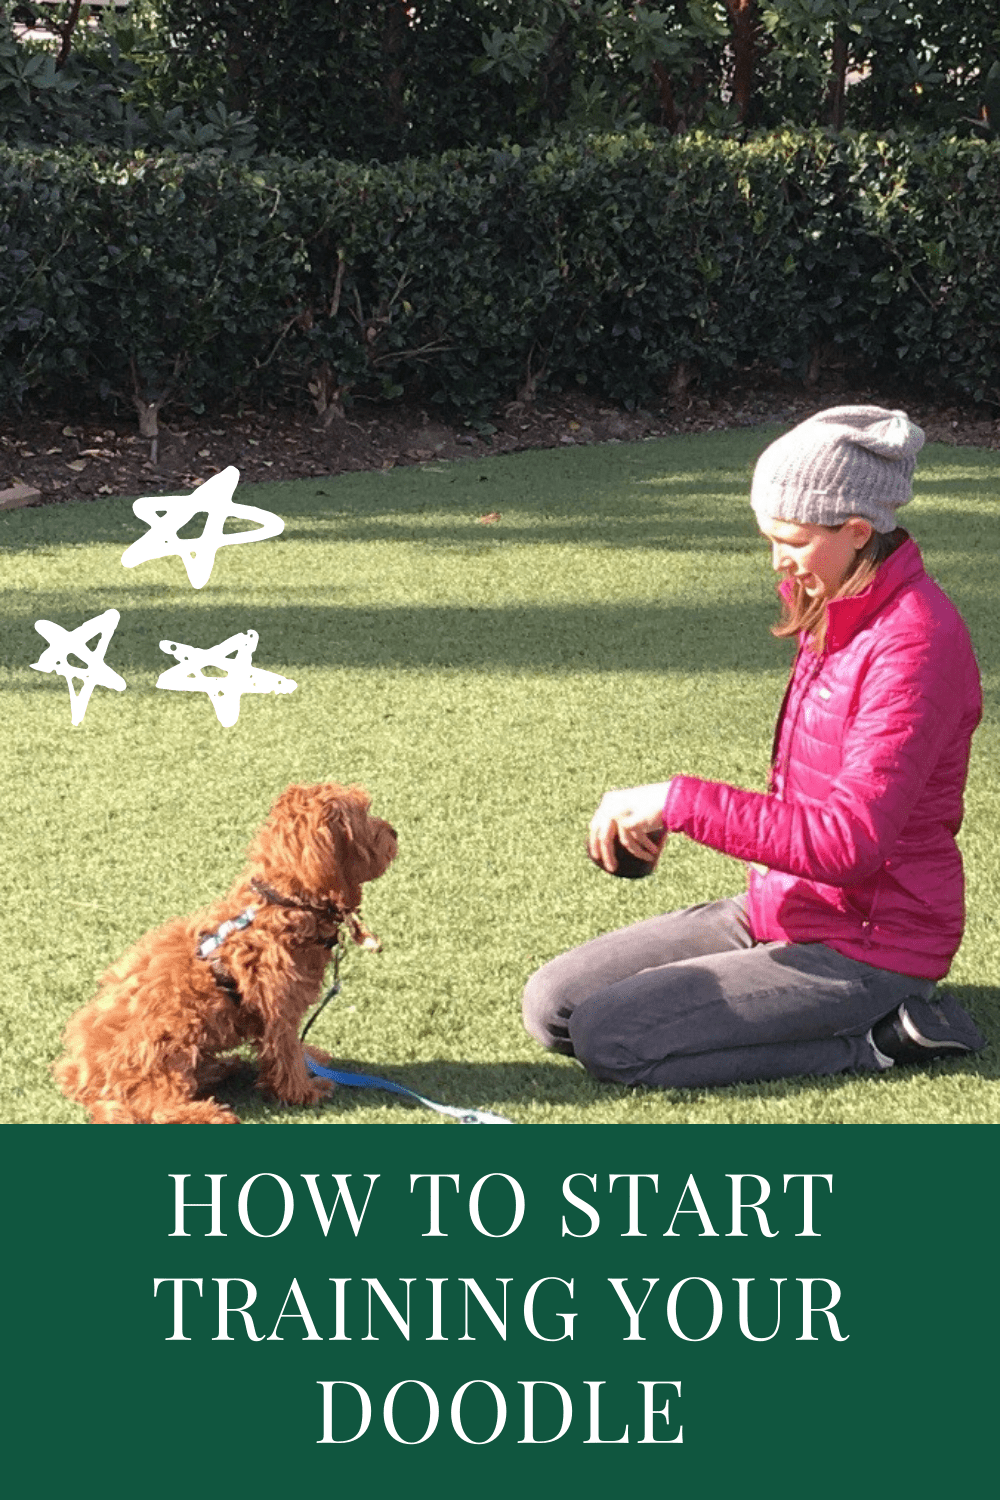 An easy guide to begin dog training!